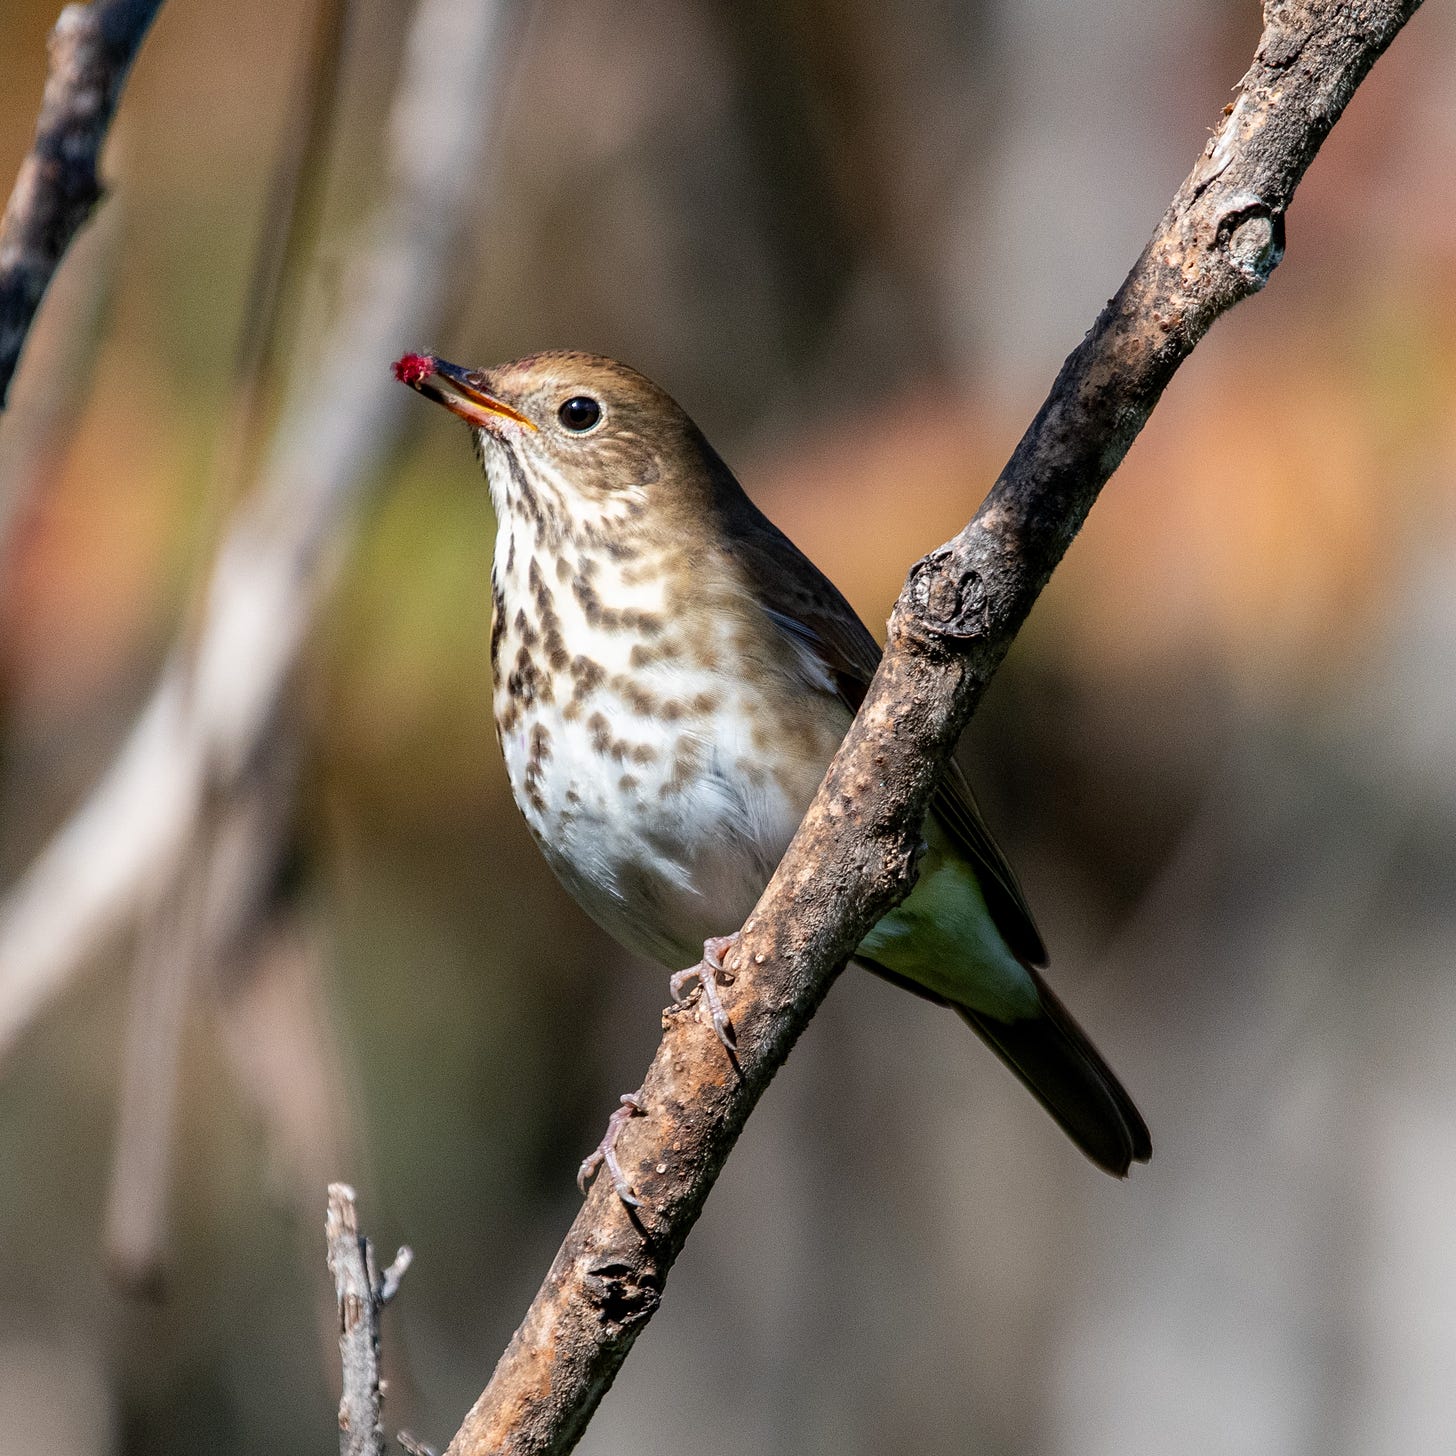 A hermit thrush holds a small red bristly fruit in its beak